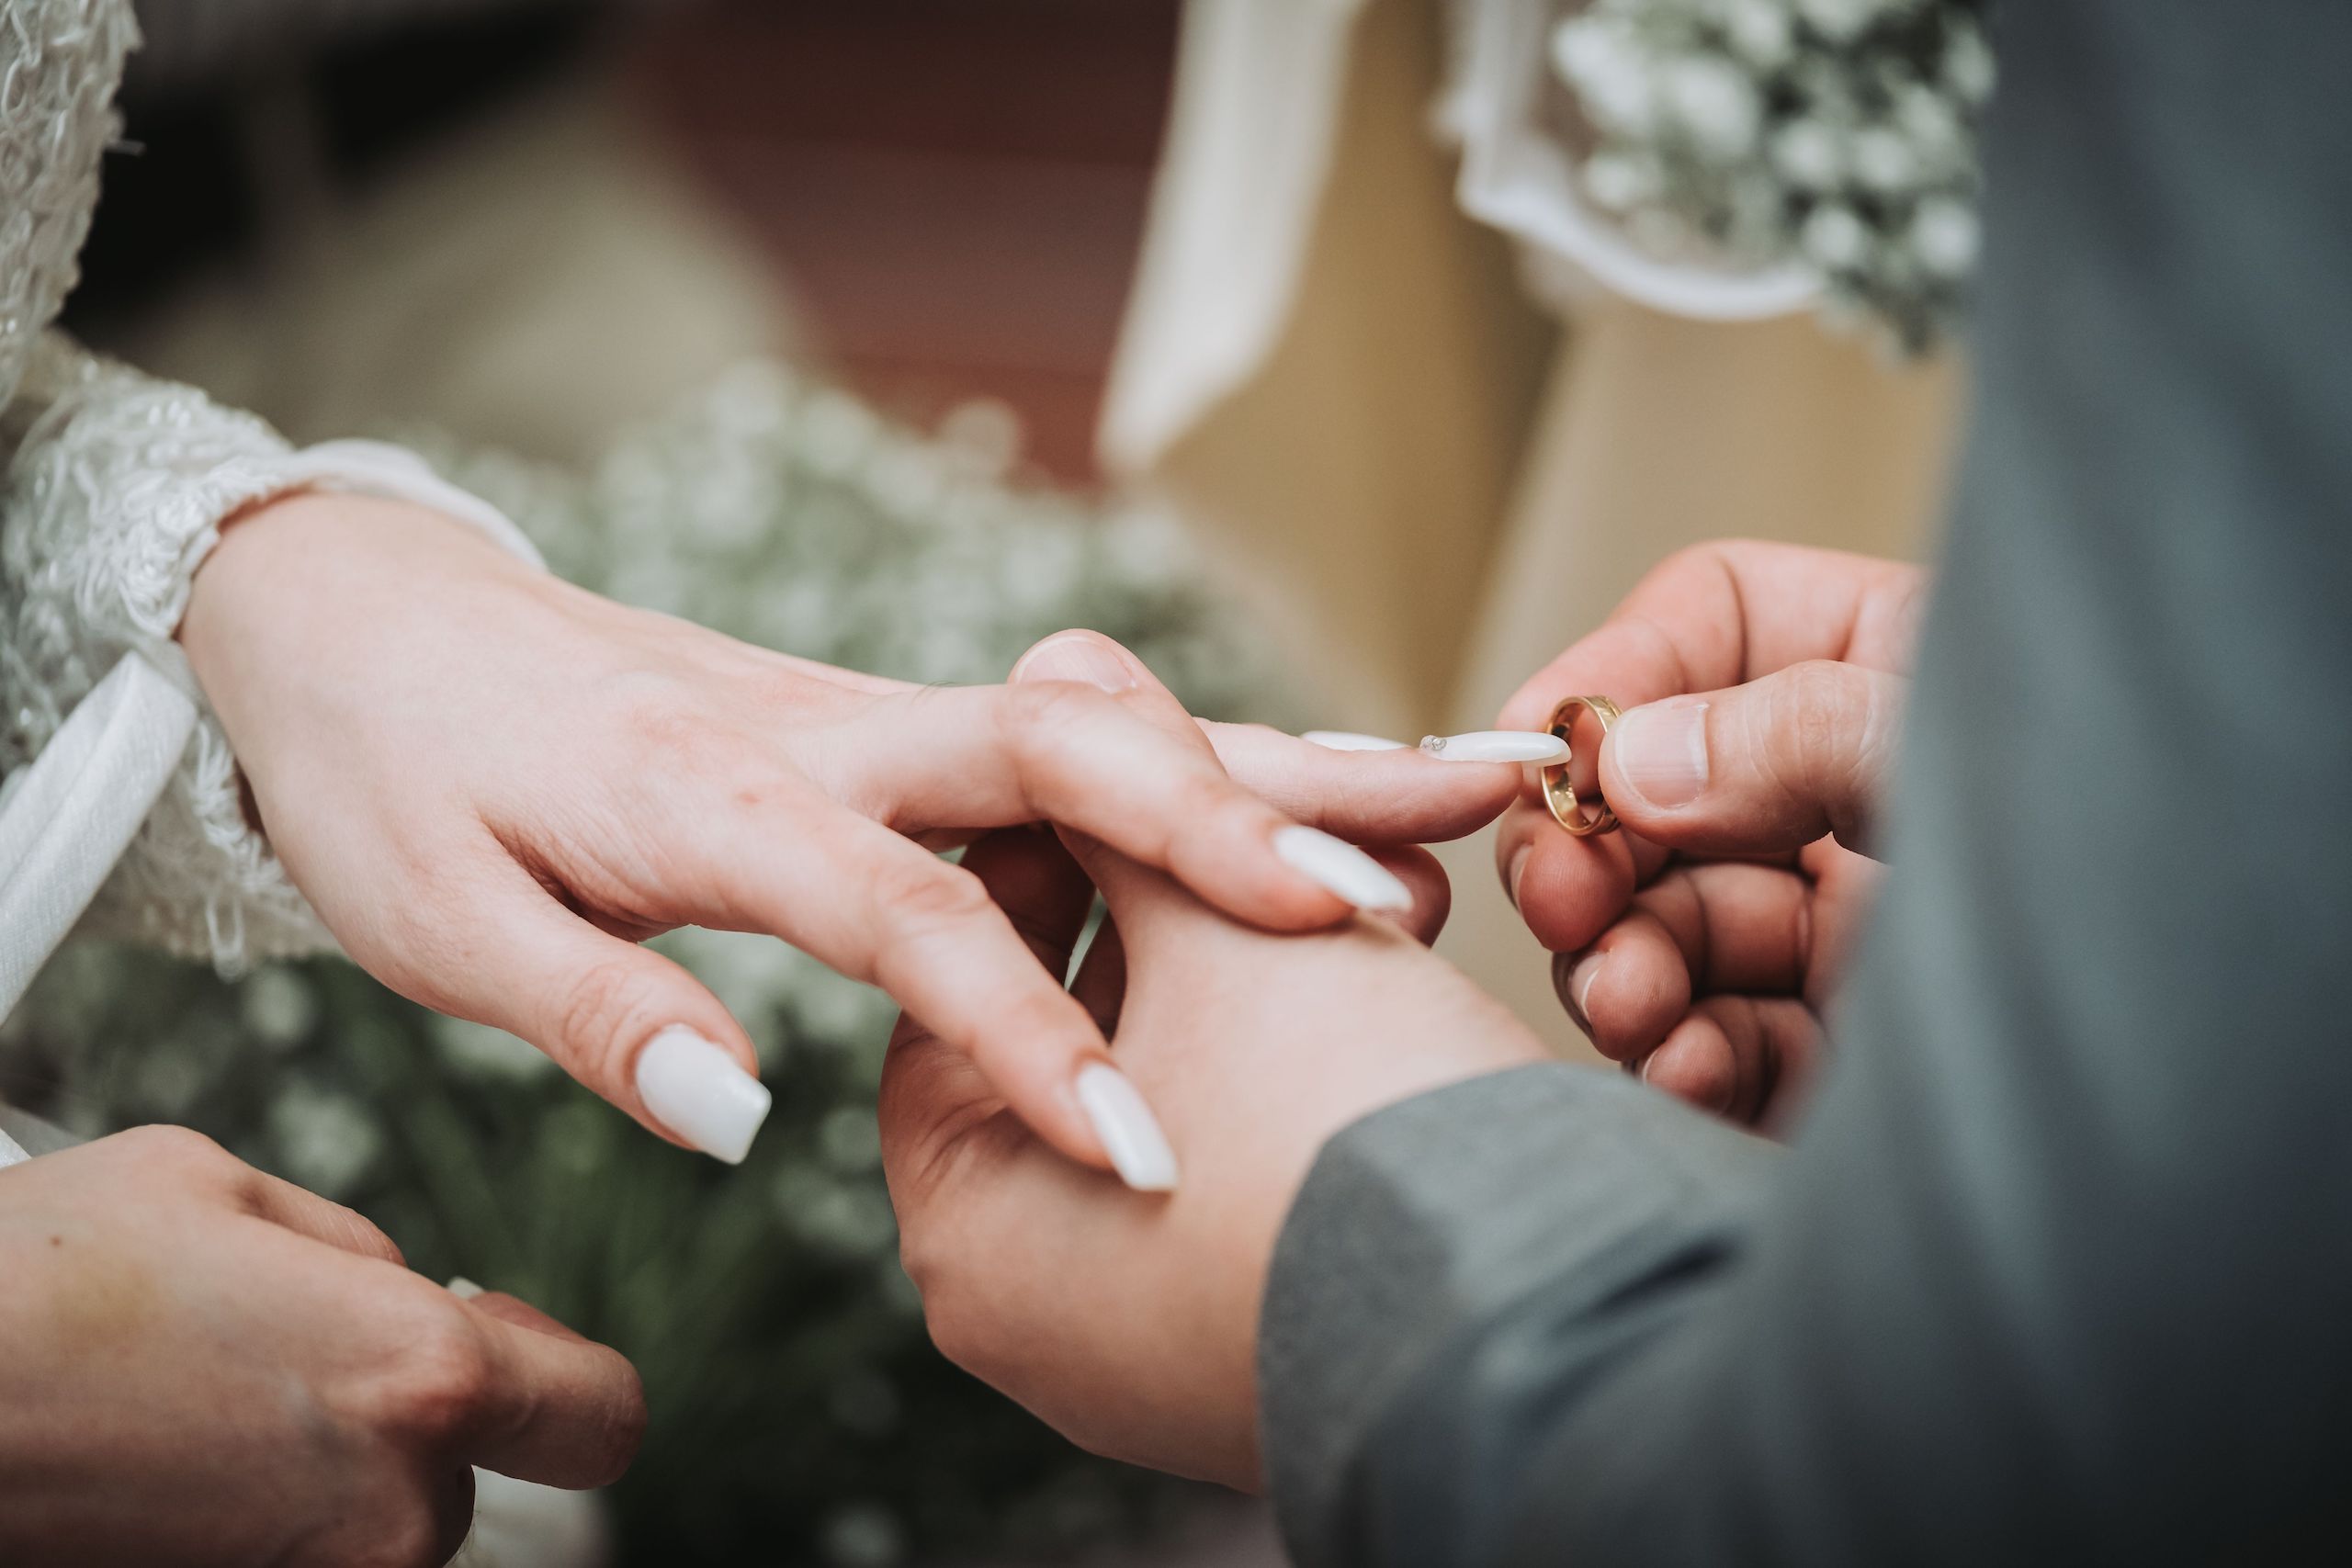 Couple exchanges rings at wedding ceremony.